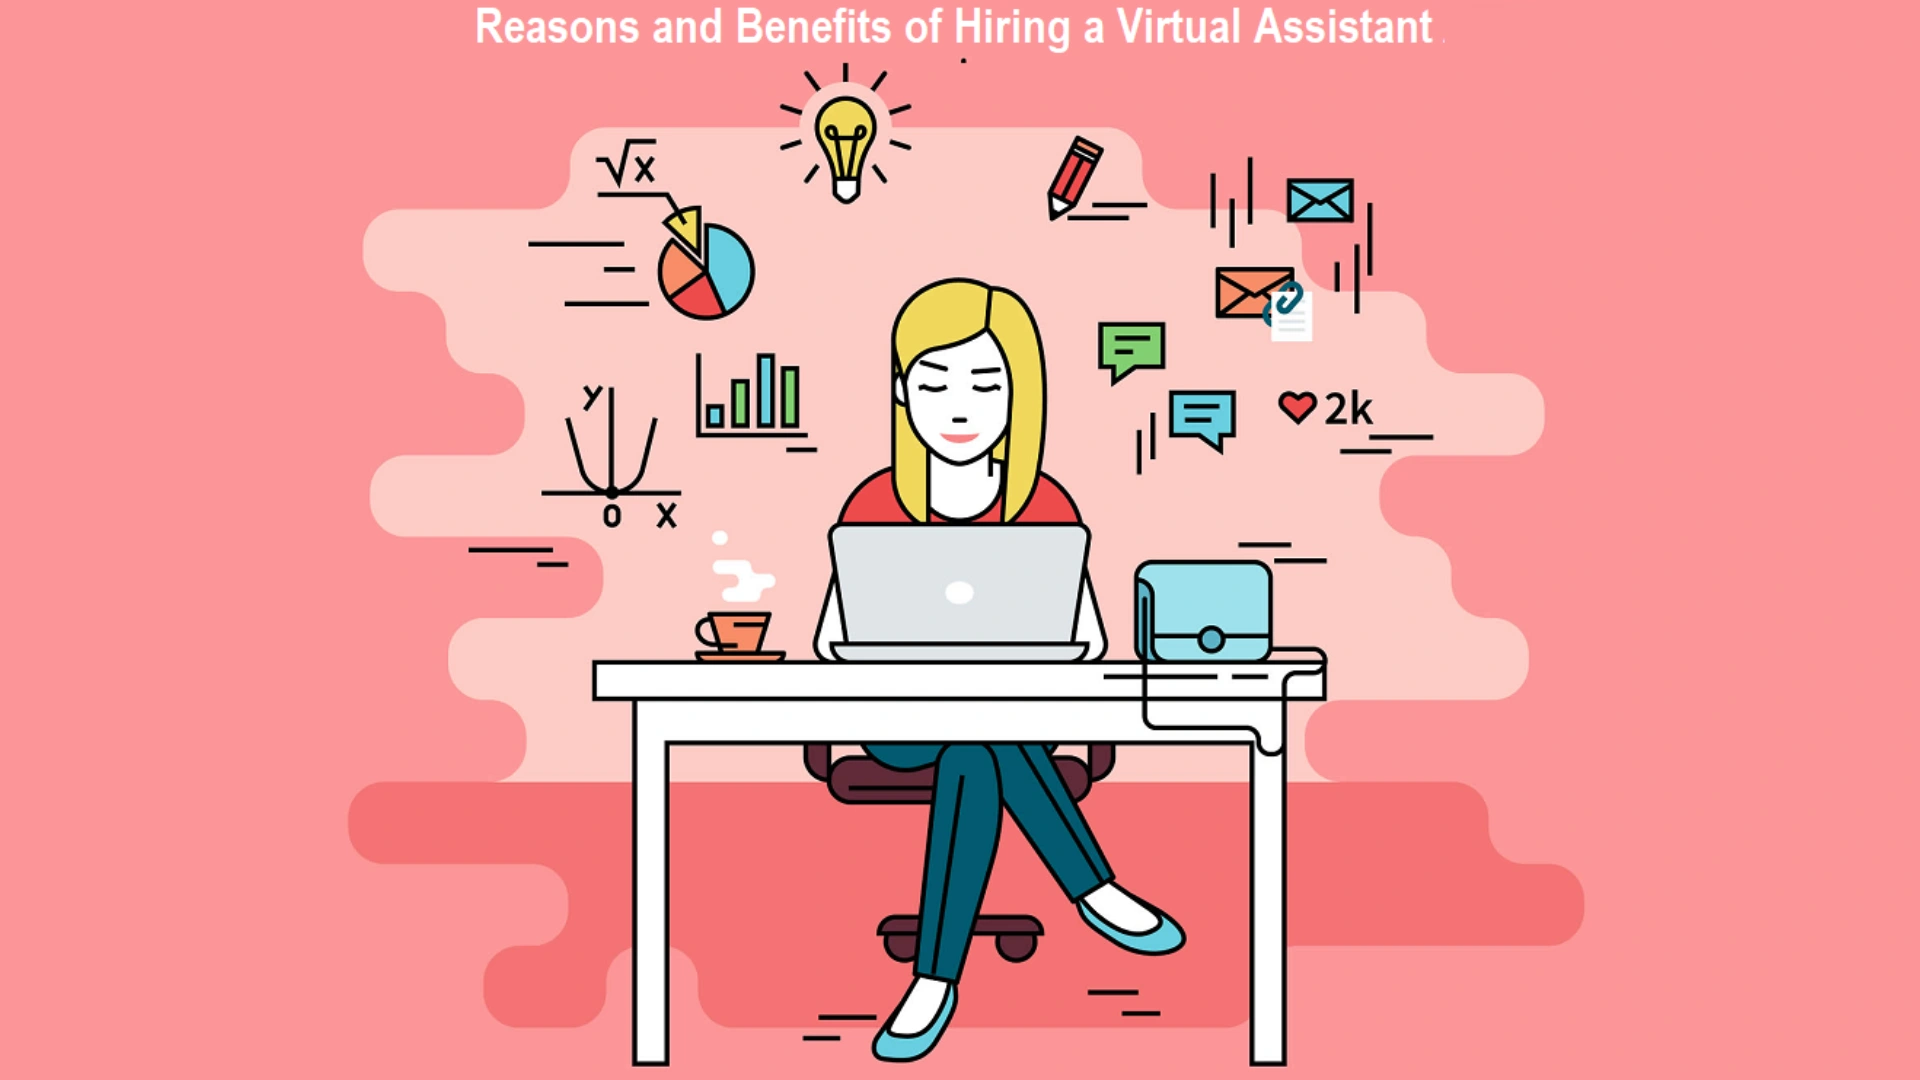 What Are The Benefits of Hiring a Virtual Assistant